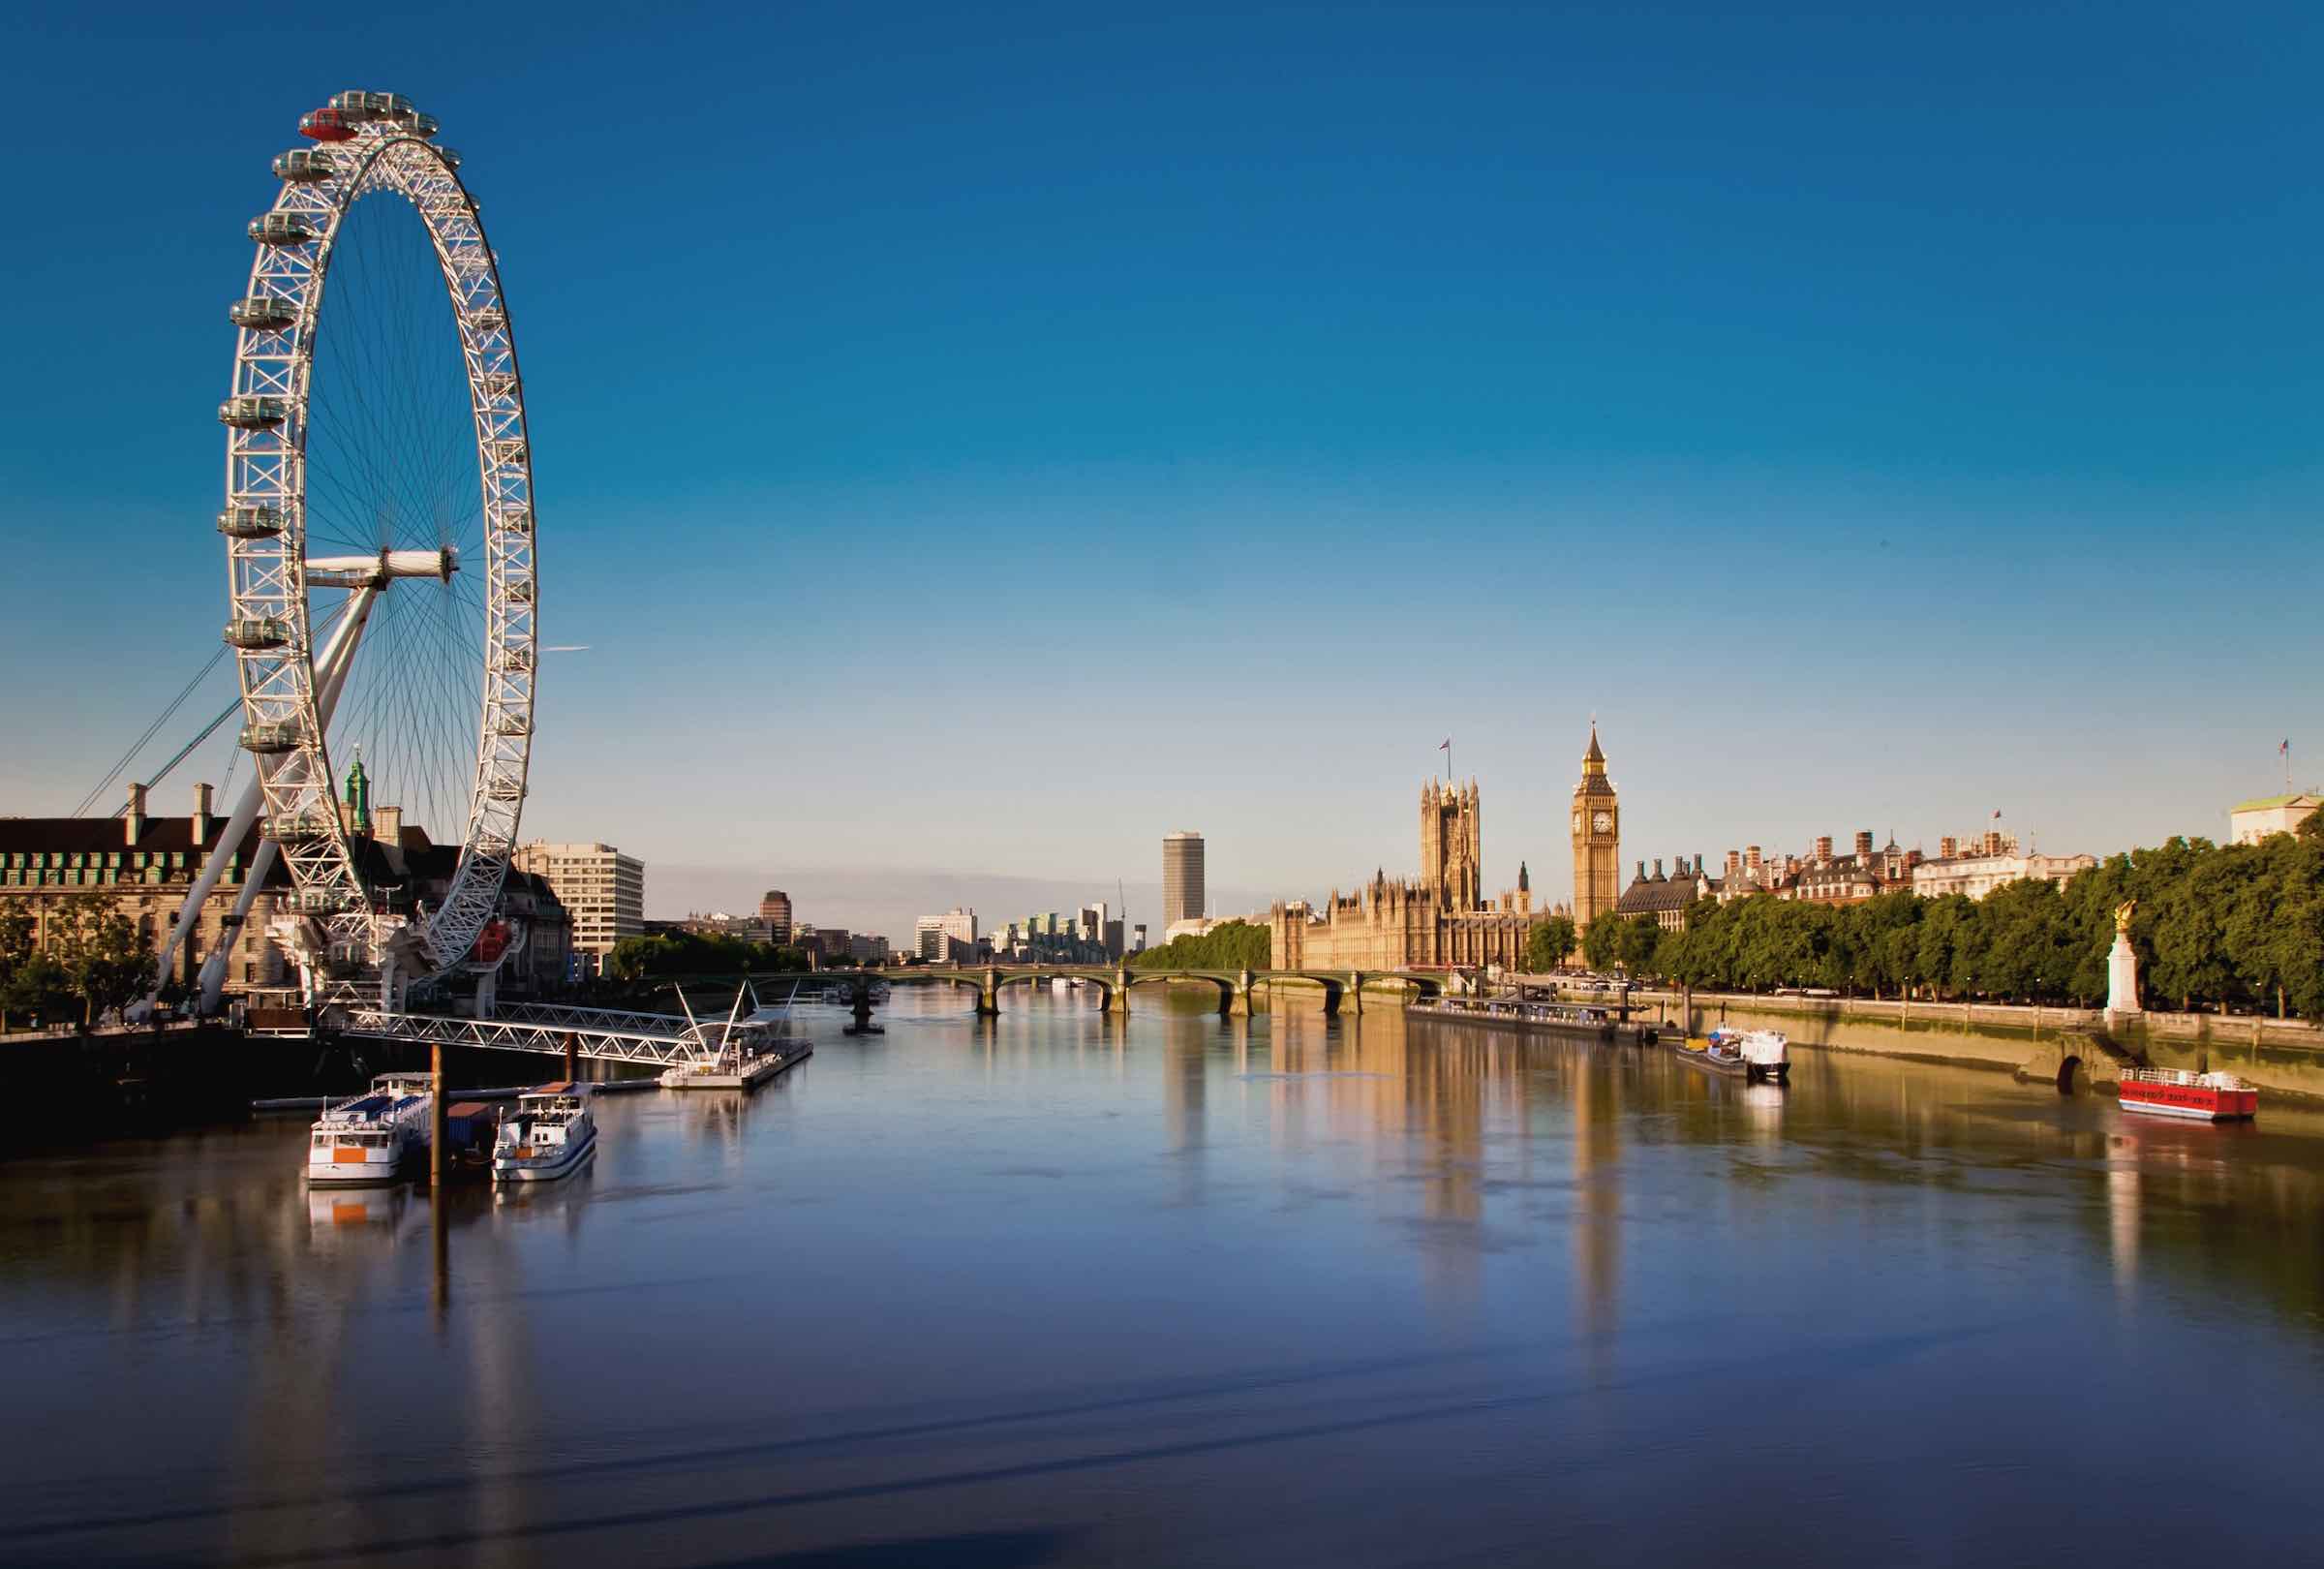 London is a popular setting for movies. Here are the most desirable tourist traps shown on the big screen.